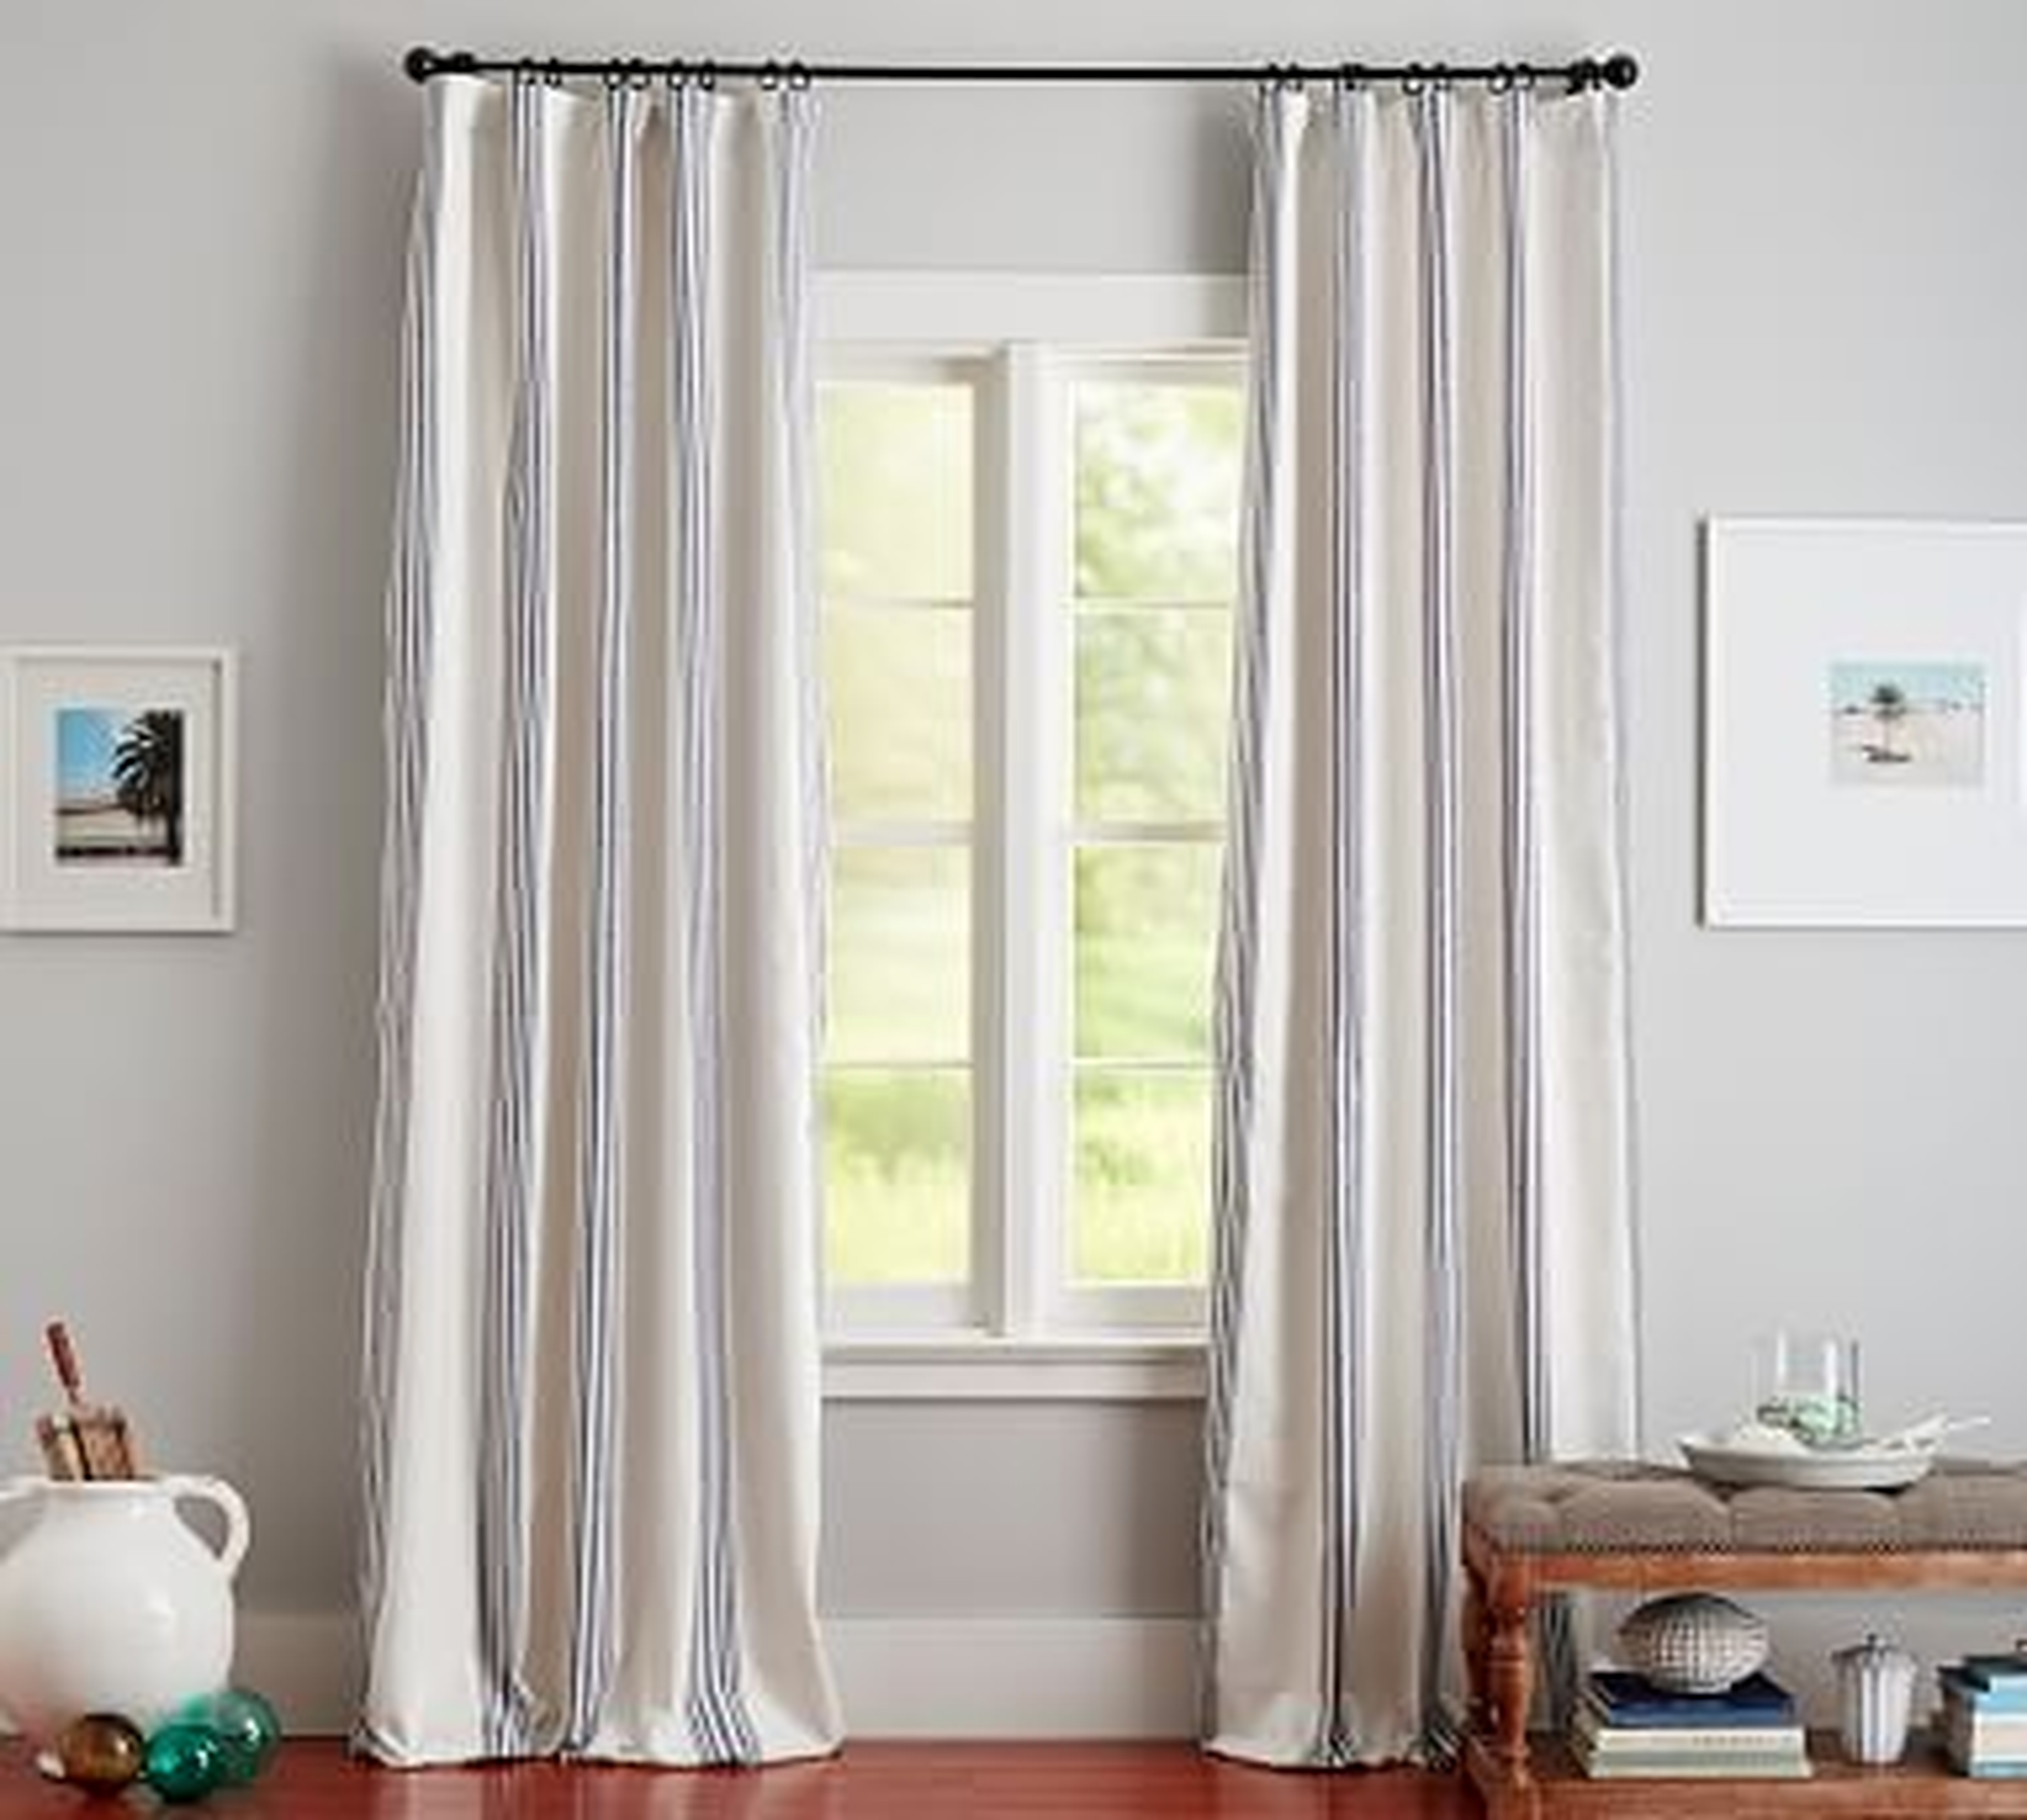 Riviera Stripe Drape with Blackout Liner, 50 x 96", Charcoal - Pottery Barn